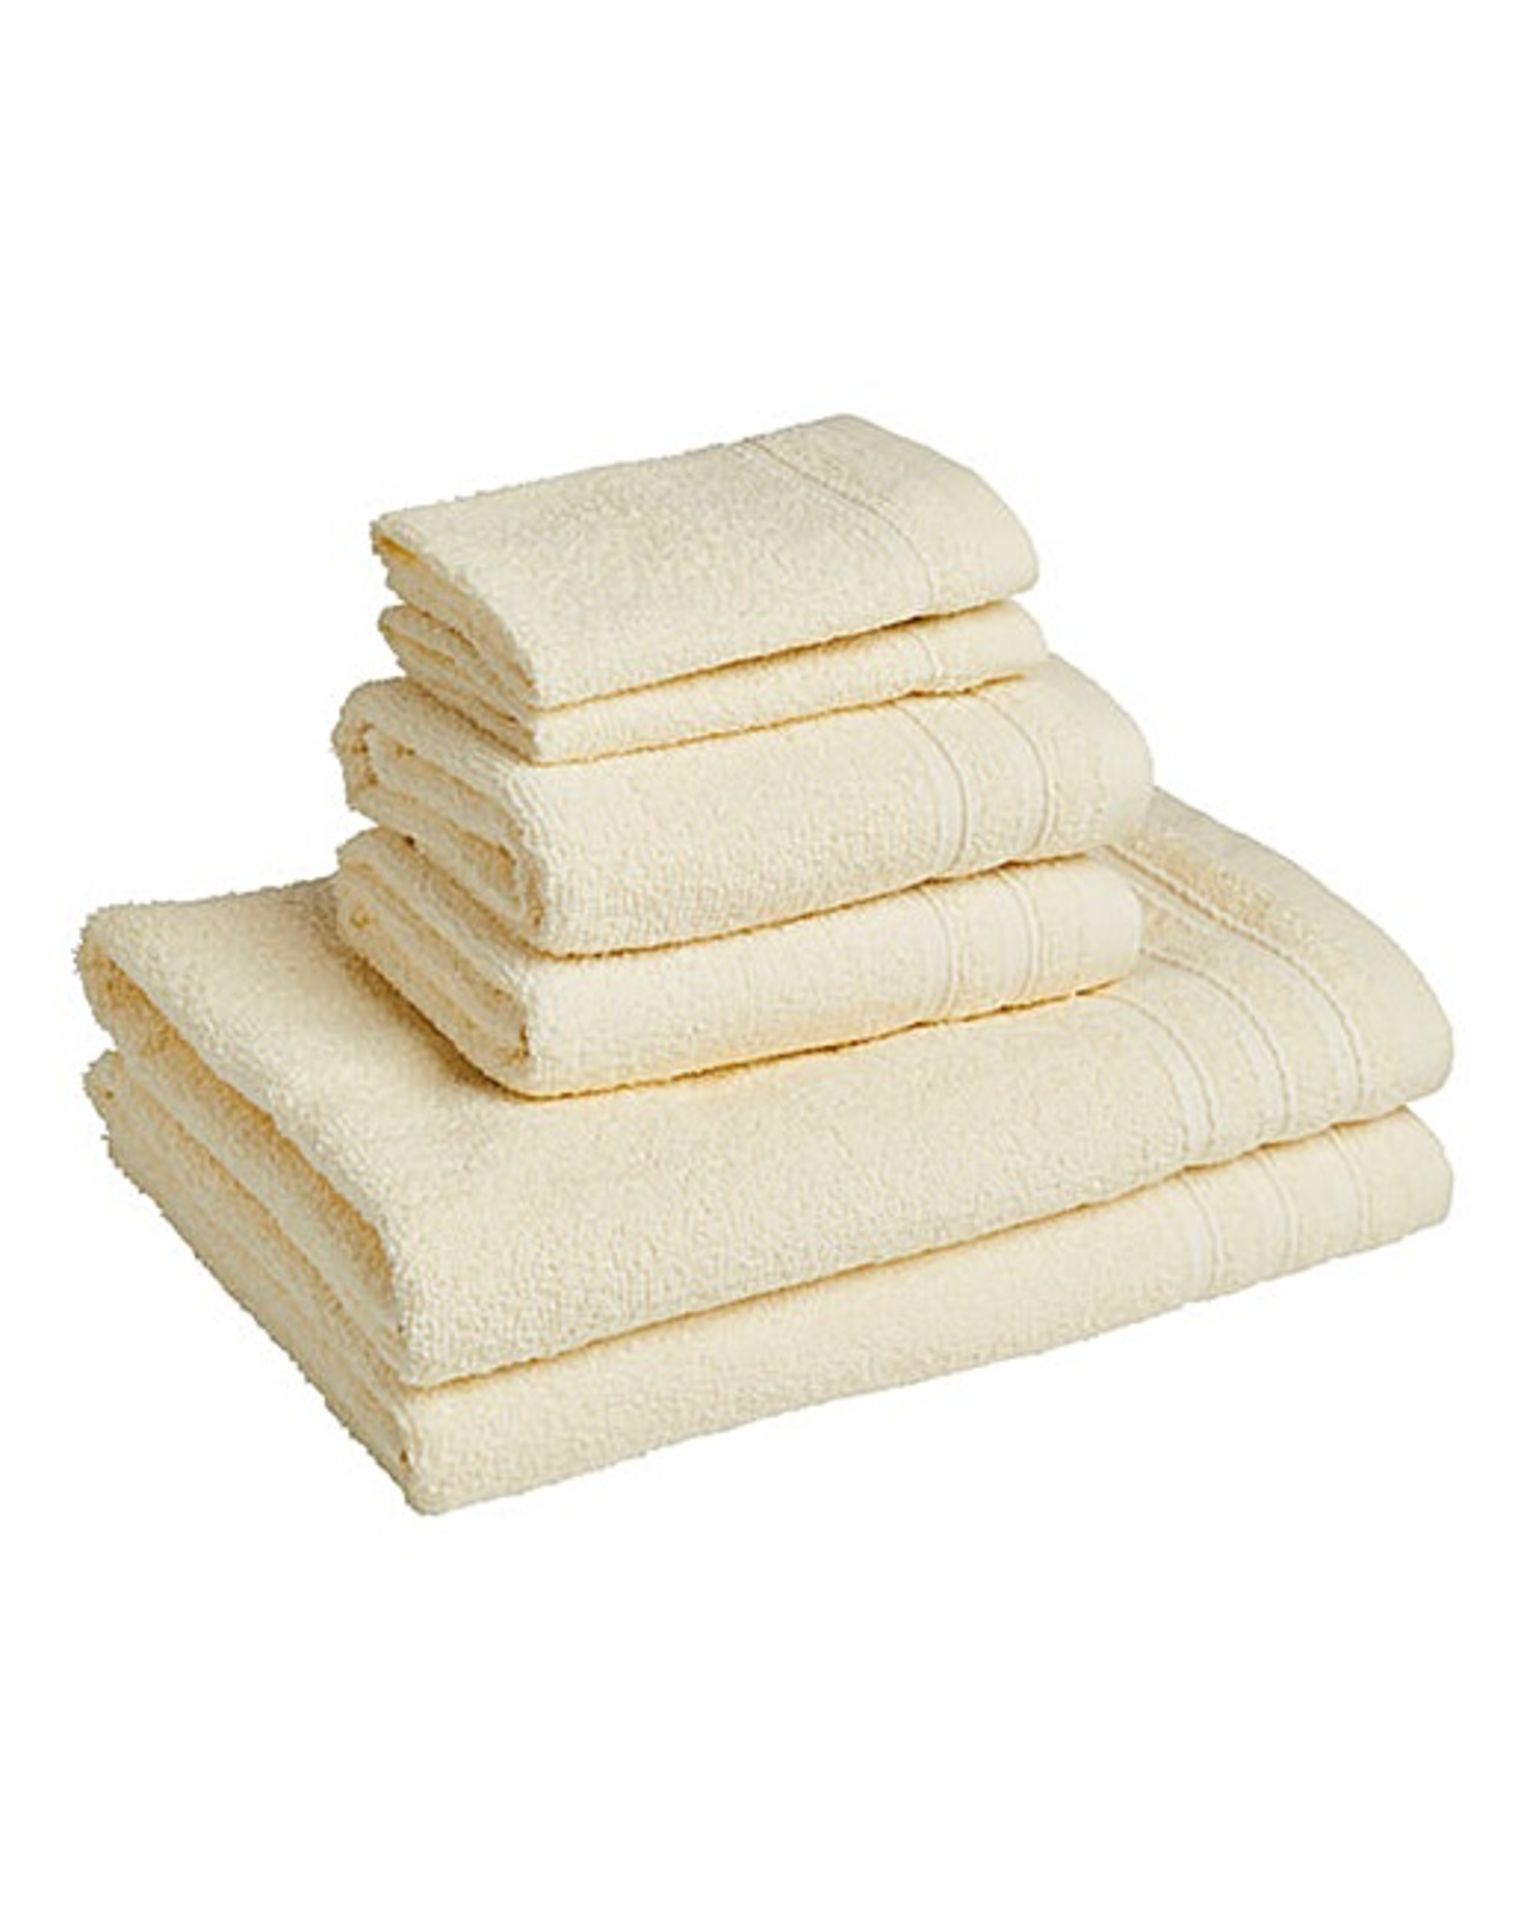 + VAT Brand New Six Piece Latte Towel Bale Set Including Two Bath Towels-Two Hand Towels & Two Face